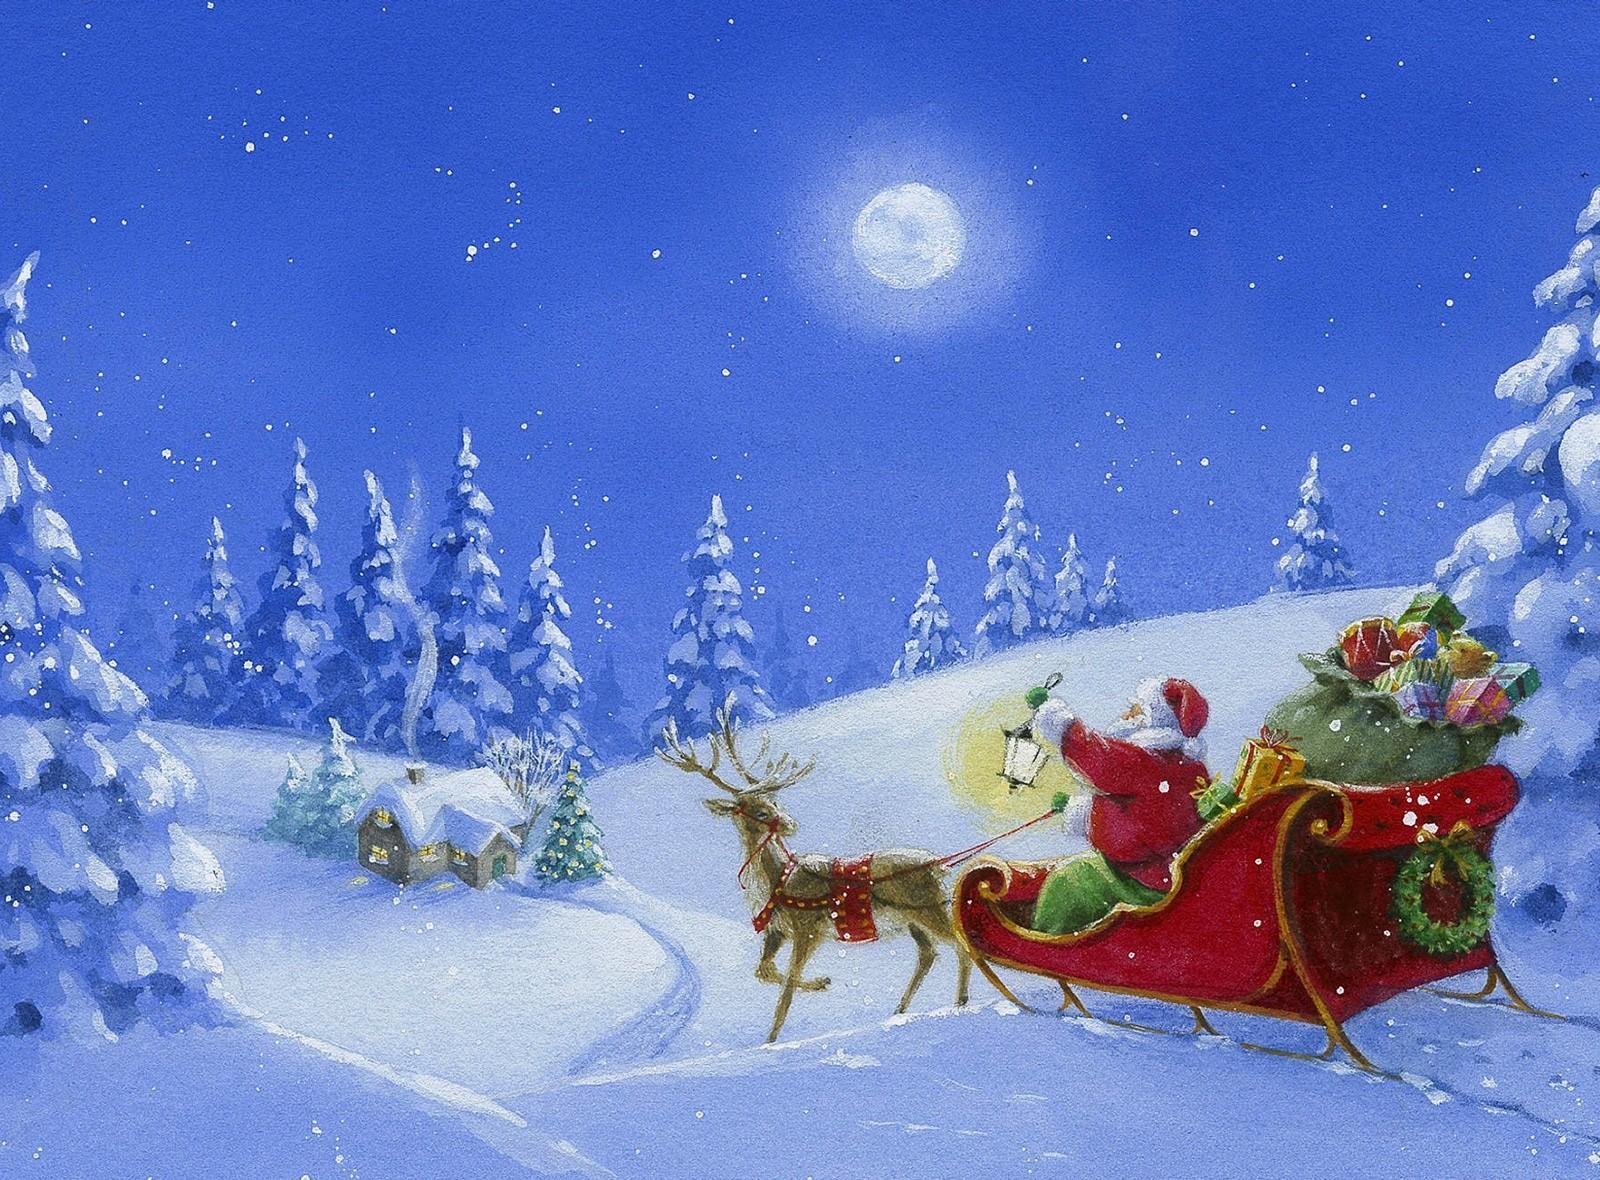 holidays, santa claus, night, moon, forest, house, lamp, lantern, deer, sleigh, sledge, presents, gifts